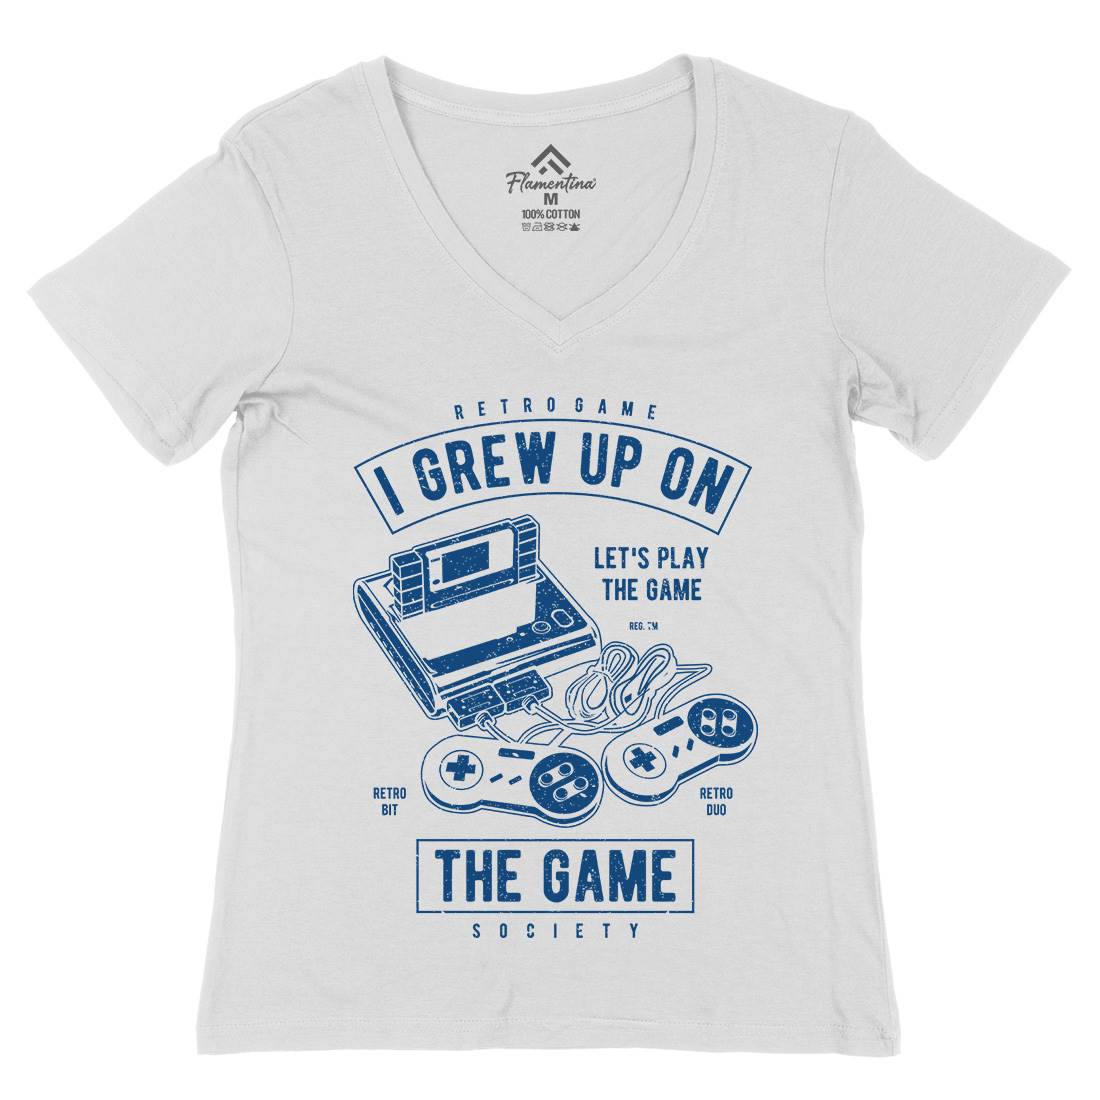 Grew Up On The Game Womens Organic V-Neck T-Shirt Geek A679